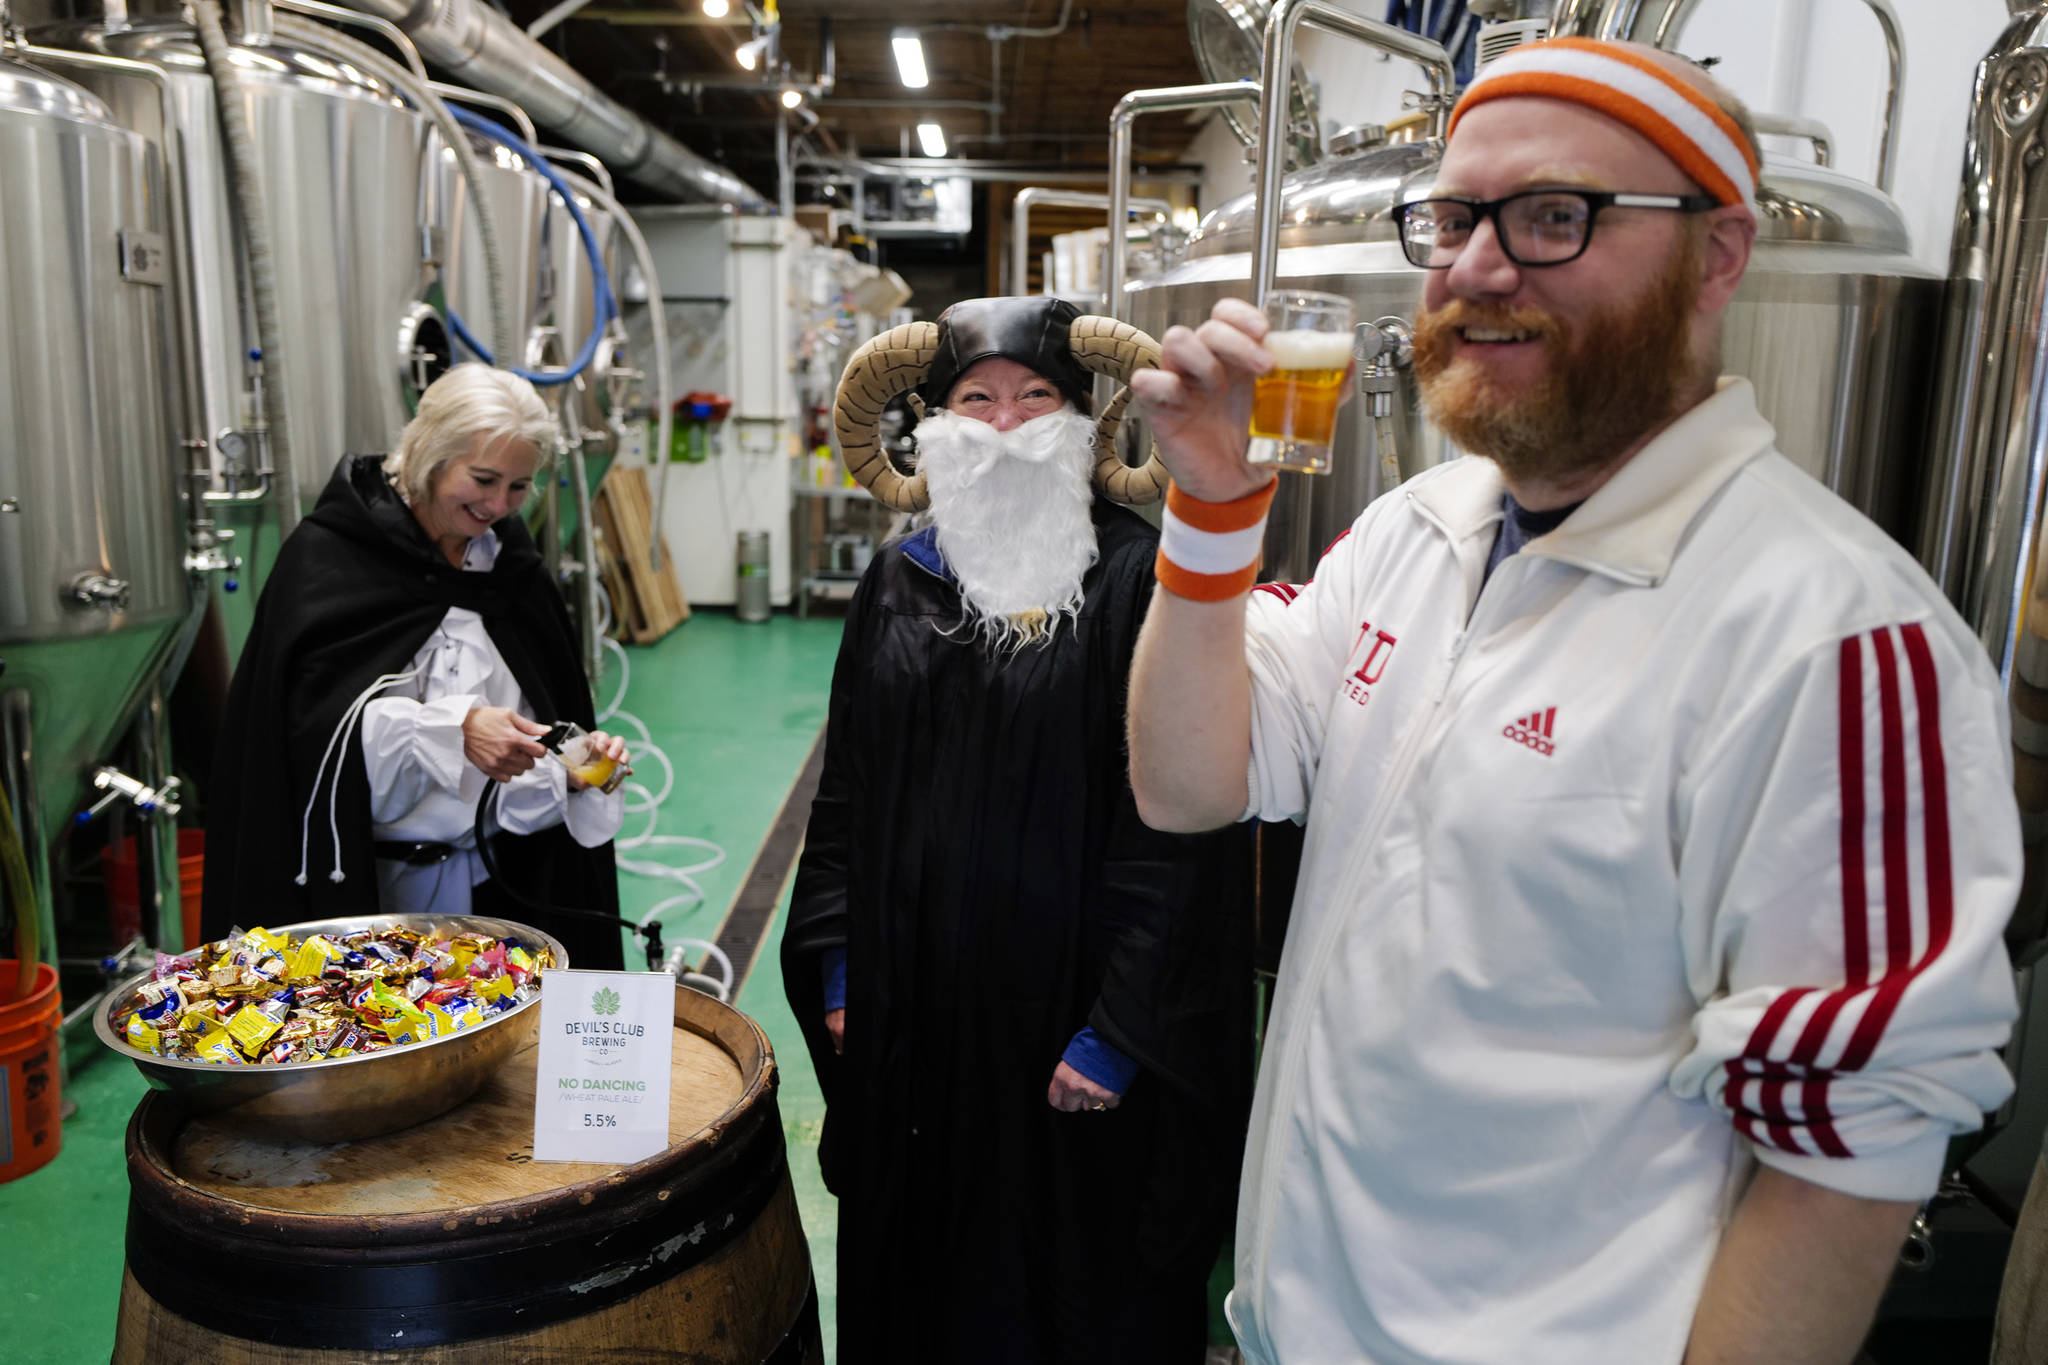 Aaron Suring takes advantage of the adult treat offered by Rachel Sanders, center, and TJ Thomson at the Devil’s Club Brewing Company during the Trick or Treat Downtown event on Thursday, Oct. 31, 2019. More than 70 business put out orange balloons to participate in the event aimed at young children. (Michael Penn | Juneau Empire)